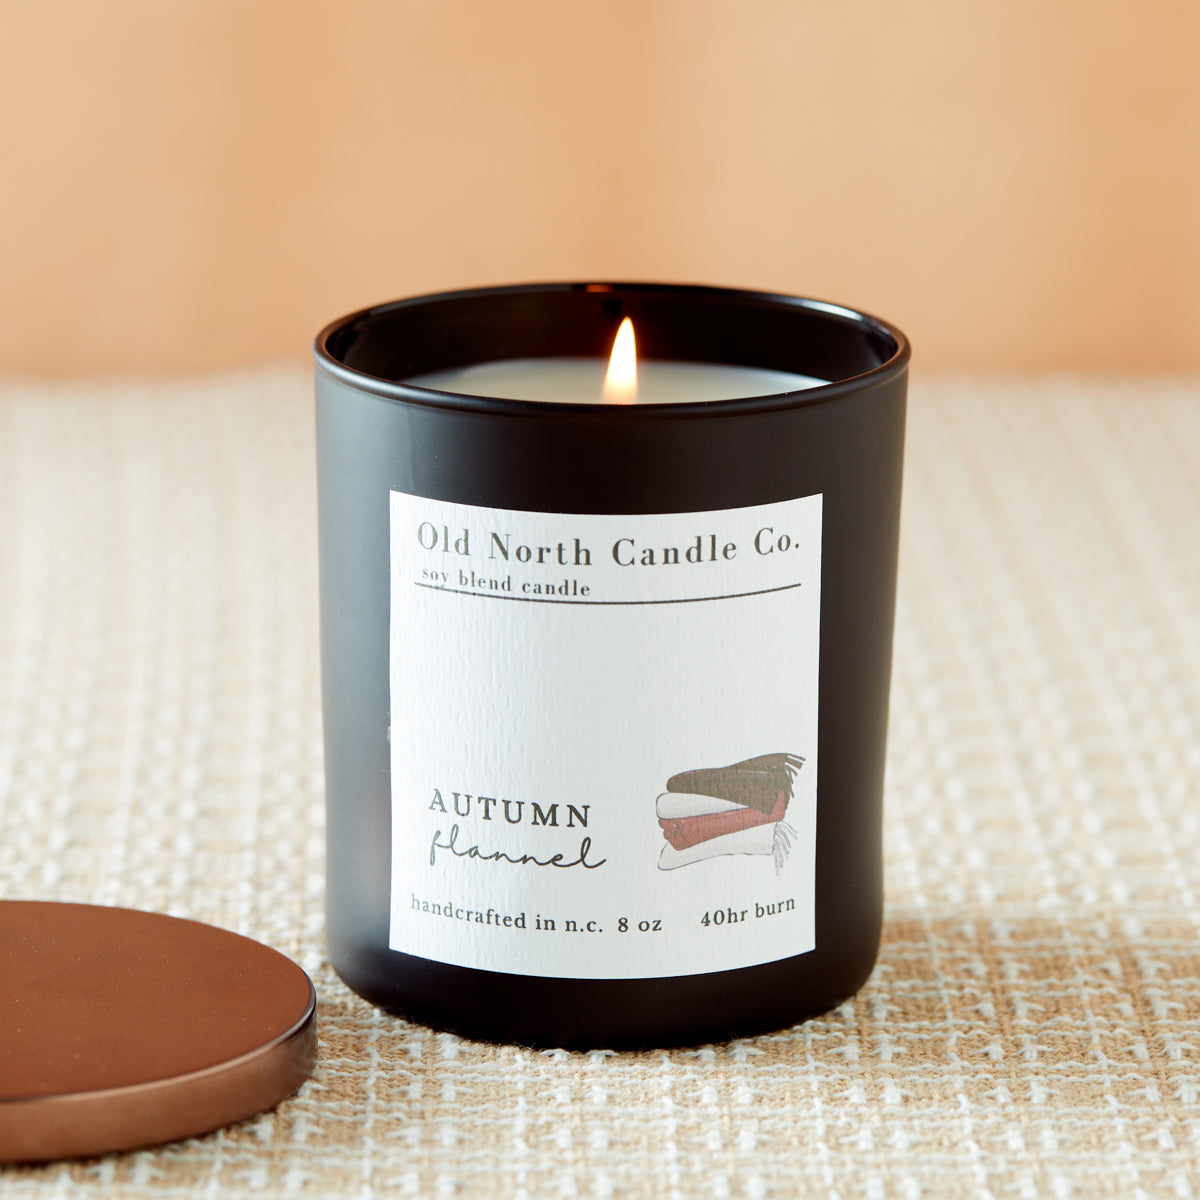 Autumn Flannel Candle